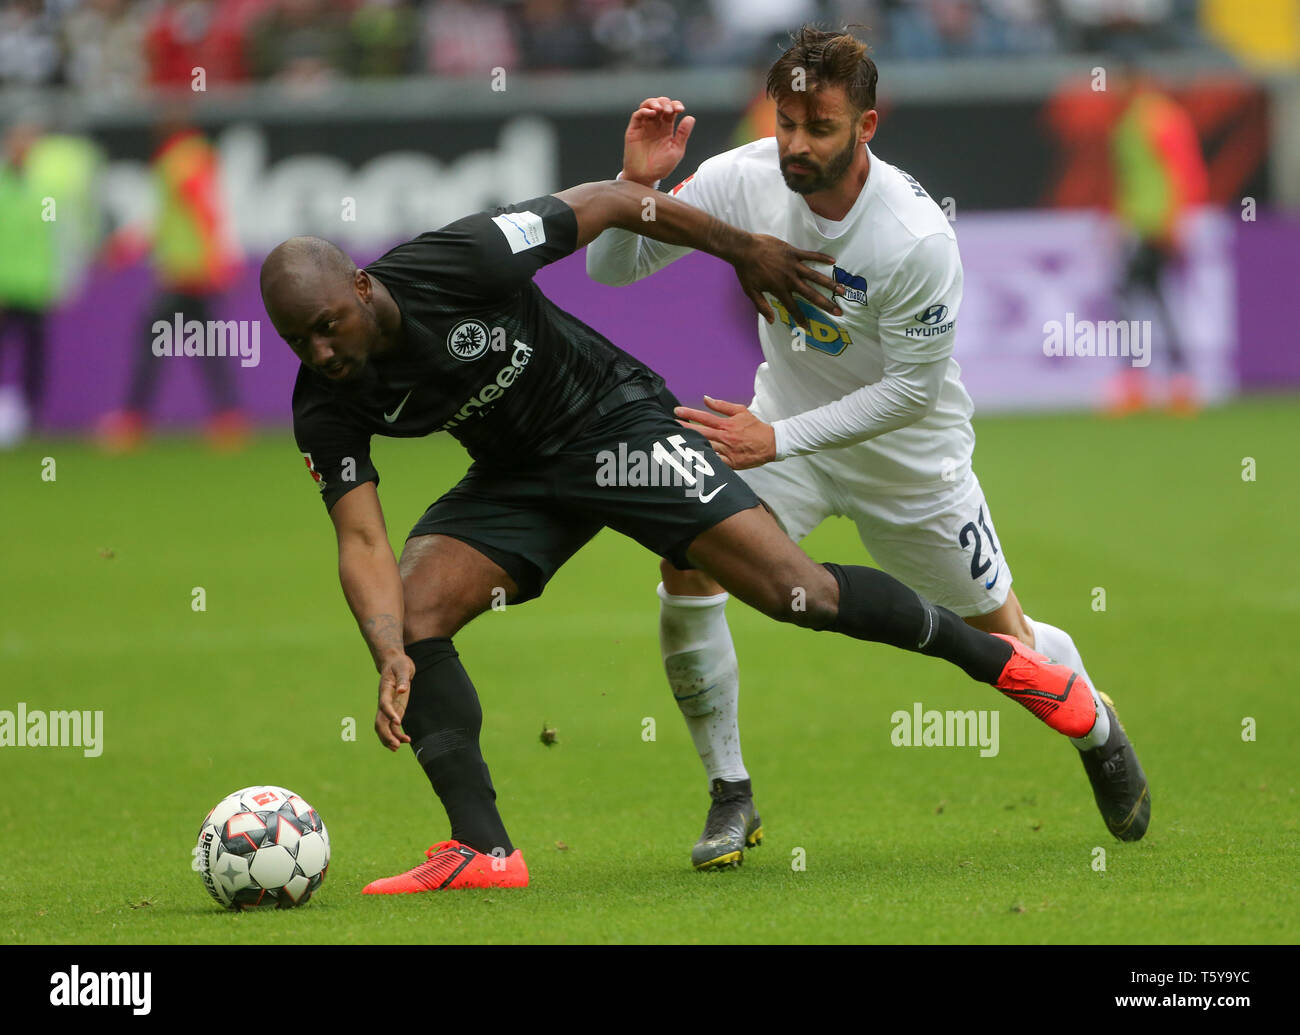 27 April 2019, Hessen, Frankfurt/M.: Soccer: Bundesliga, Eintracht Frankfurt - Hertha BSC, 31st matchday in the Commerzbank Arena. The Frankfurt Jetro Willems (l) and Berlin's Marvin Plattenhardt fight for the ball. Photo: Thomas Frey/dpa - IMPORTANT NOTE: In accordance with the requirements of the DFL Deutsche Fußball Liga or the DFB Deutscher Fußball-Bund, it is prohibited to use or have used photographs taken in the stadium and/or the match in the form of sequence images and/or video-like photo sequences. Stock Photo